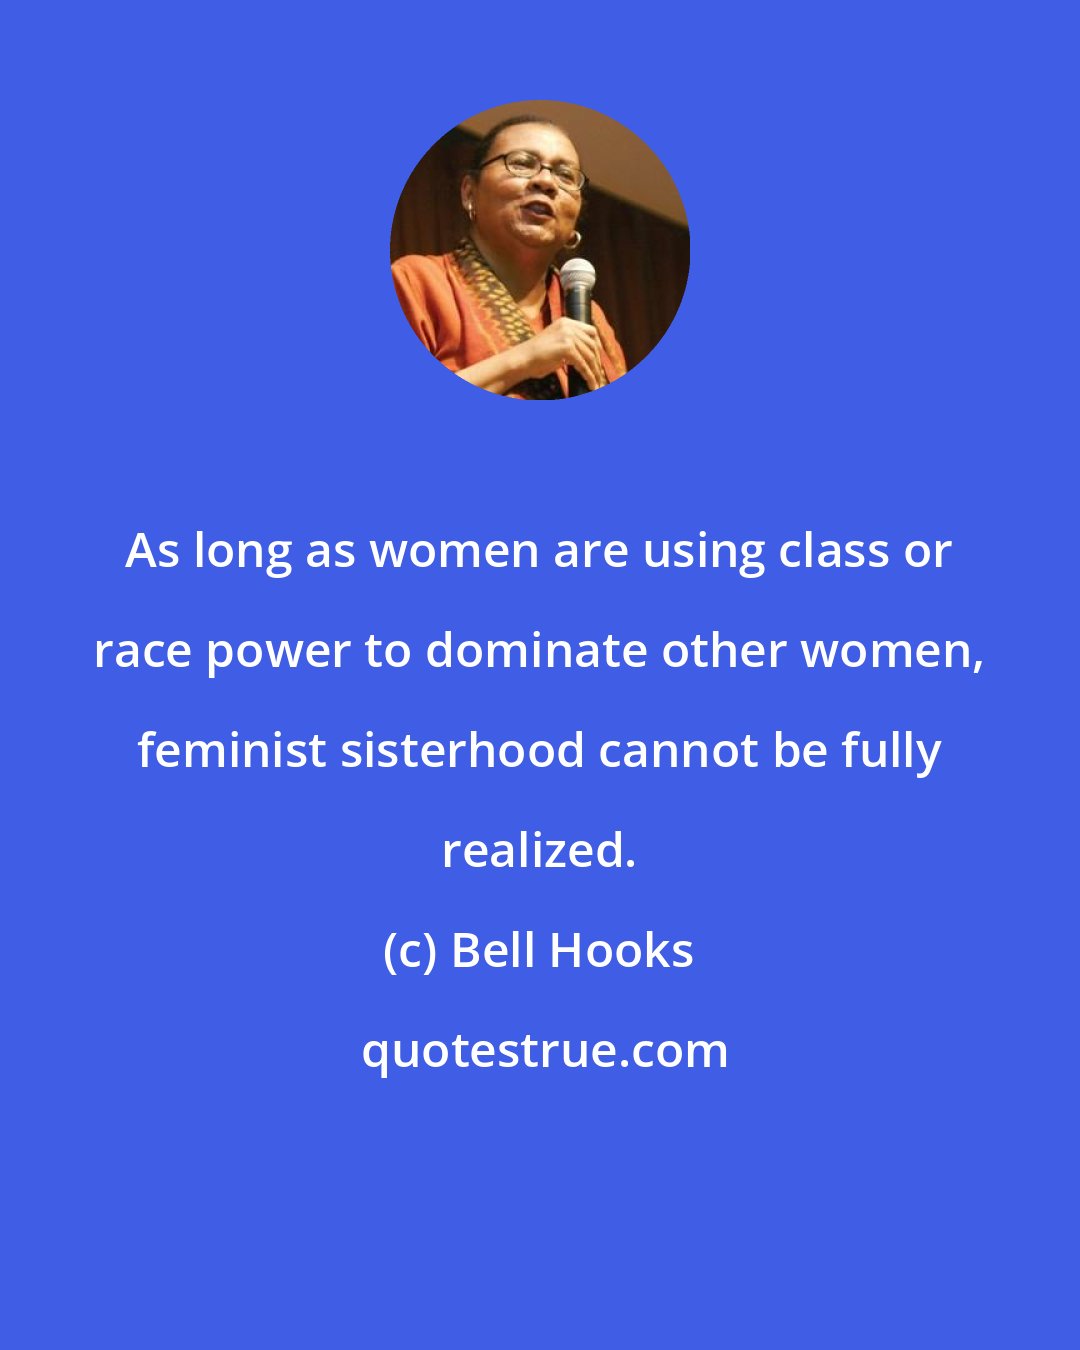 Bell Hooks: As long as women are using class or race power to dominate other women, feminist sisterhood cannot be fully realized.